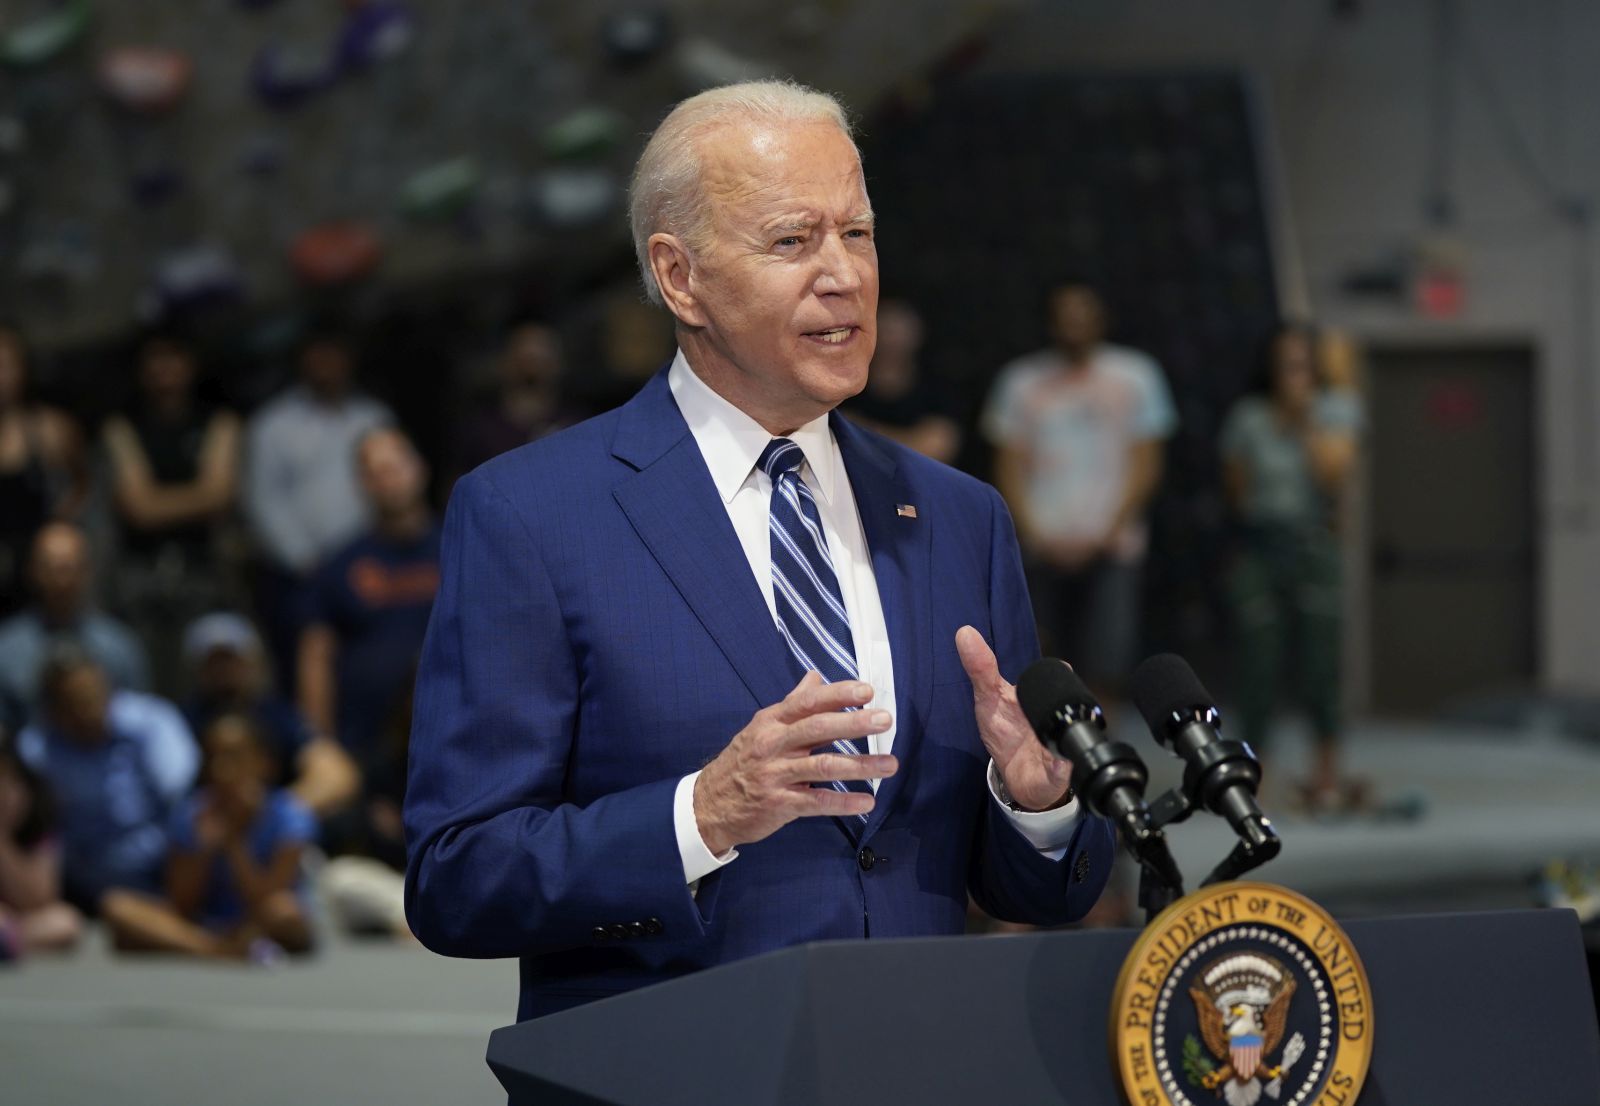 epa09233693 US President Joe Biden delivers remarks at Sportrock Climbing Center in Alexandria, Virginia, USA, 28 May 2021, to celebrate the significant progress Virginia has made in the fight against COVID-19, in partnership with the Biden-Harris Administration.  EPA/Chris Kleponis / POOL